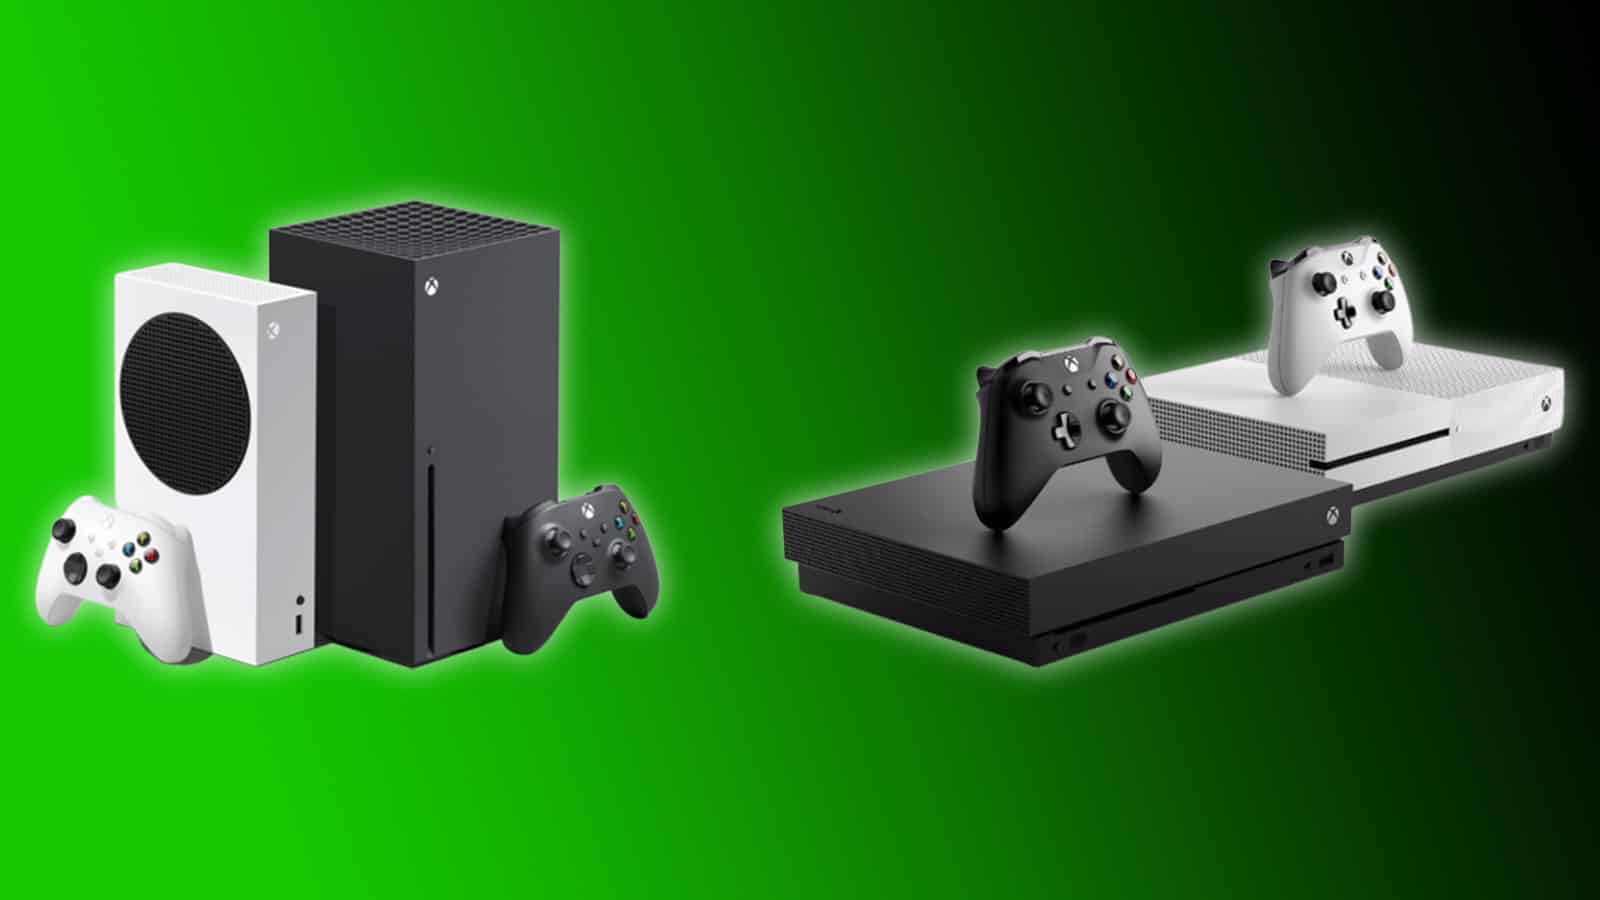 All Xbox Consoles In Order (The Complete List)